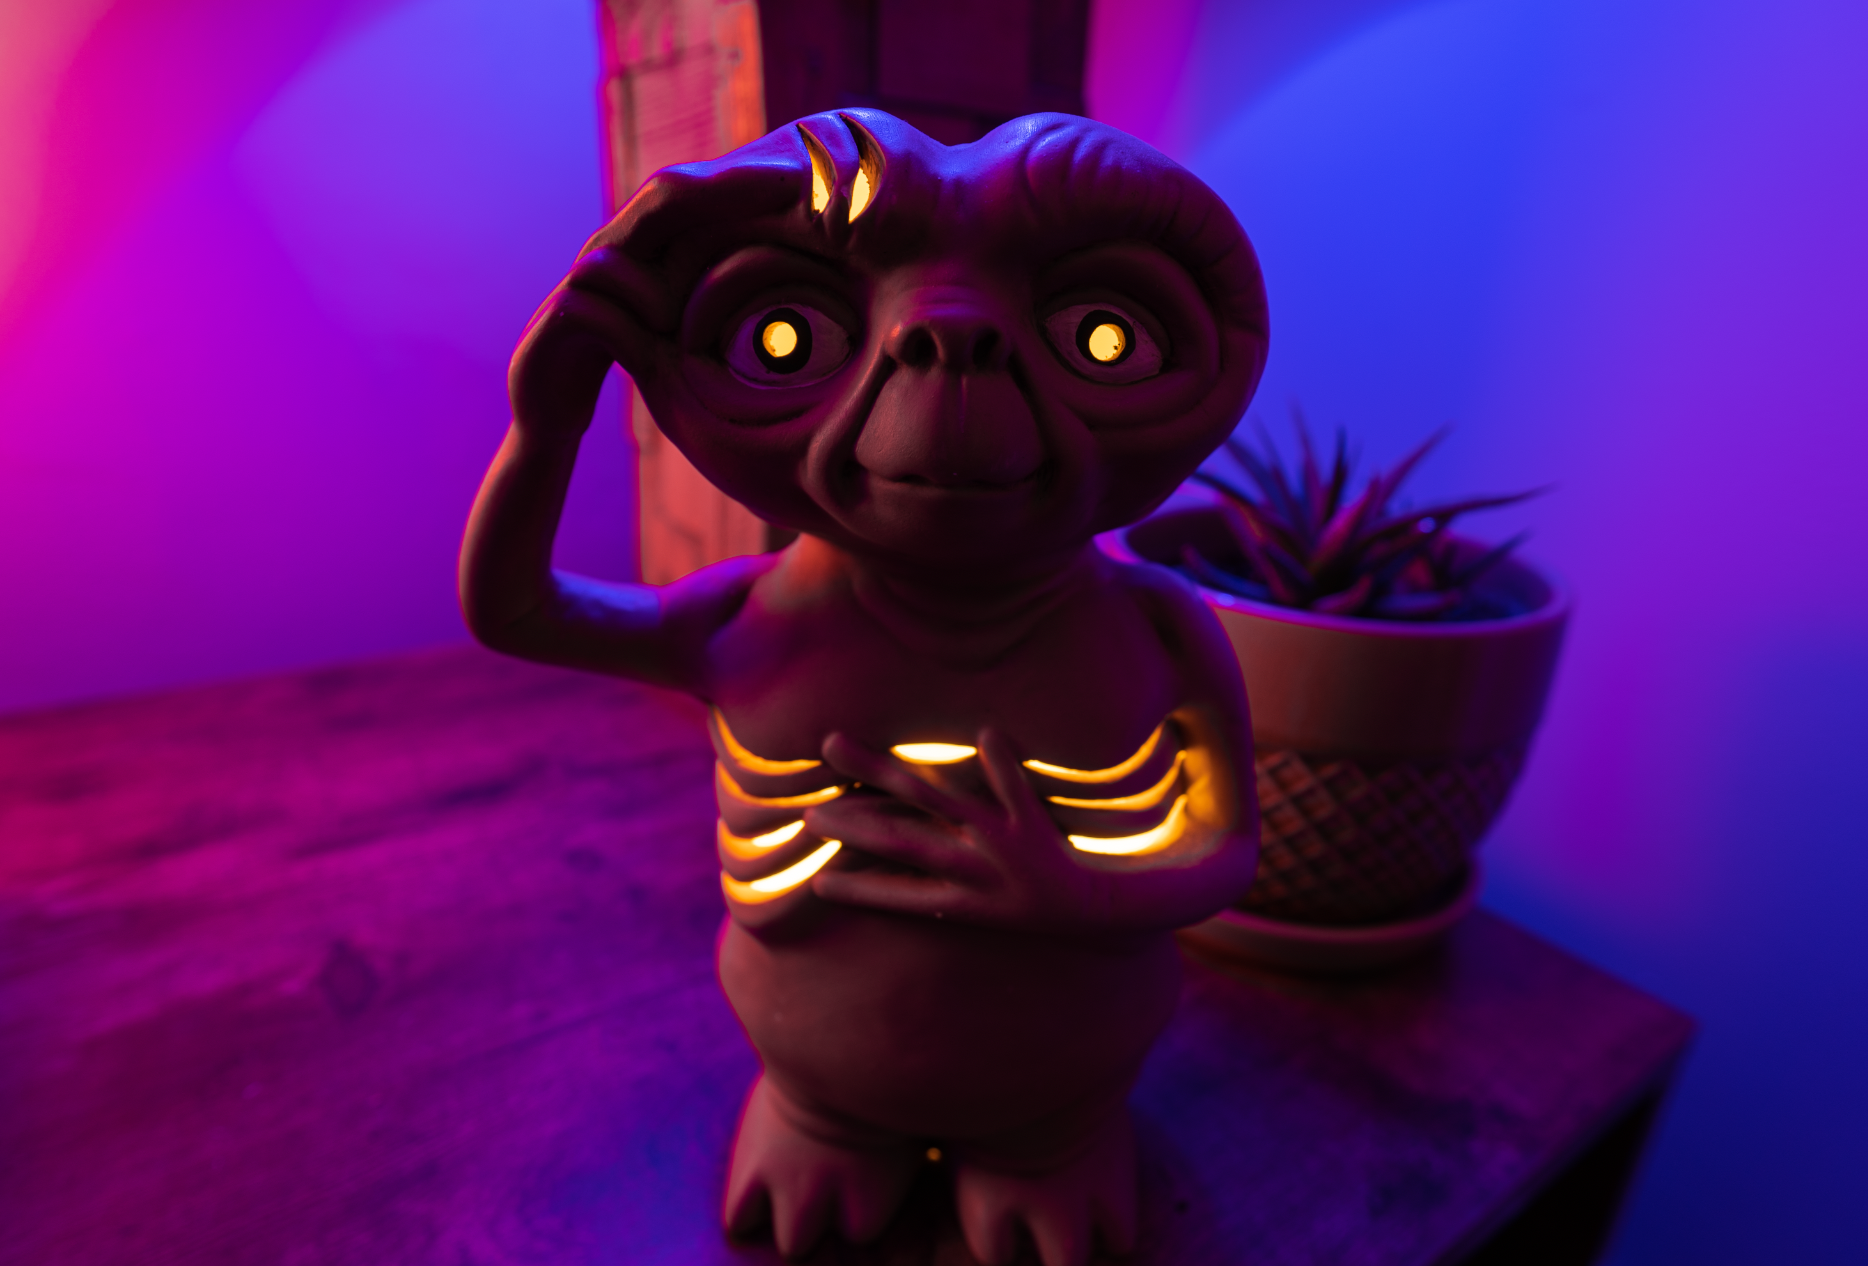 Lamp of ET, from the movie, with lit up eyes and rib cage